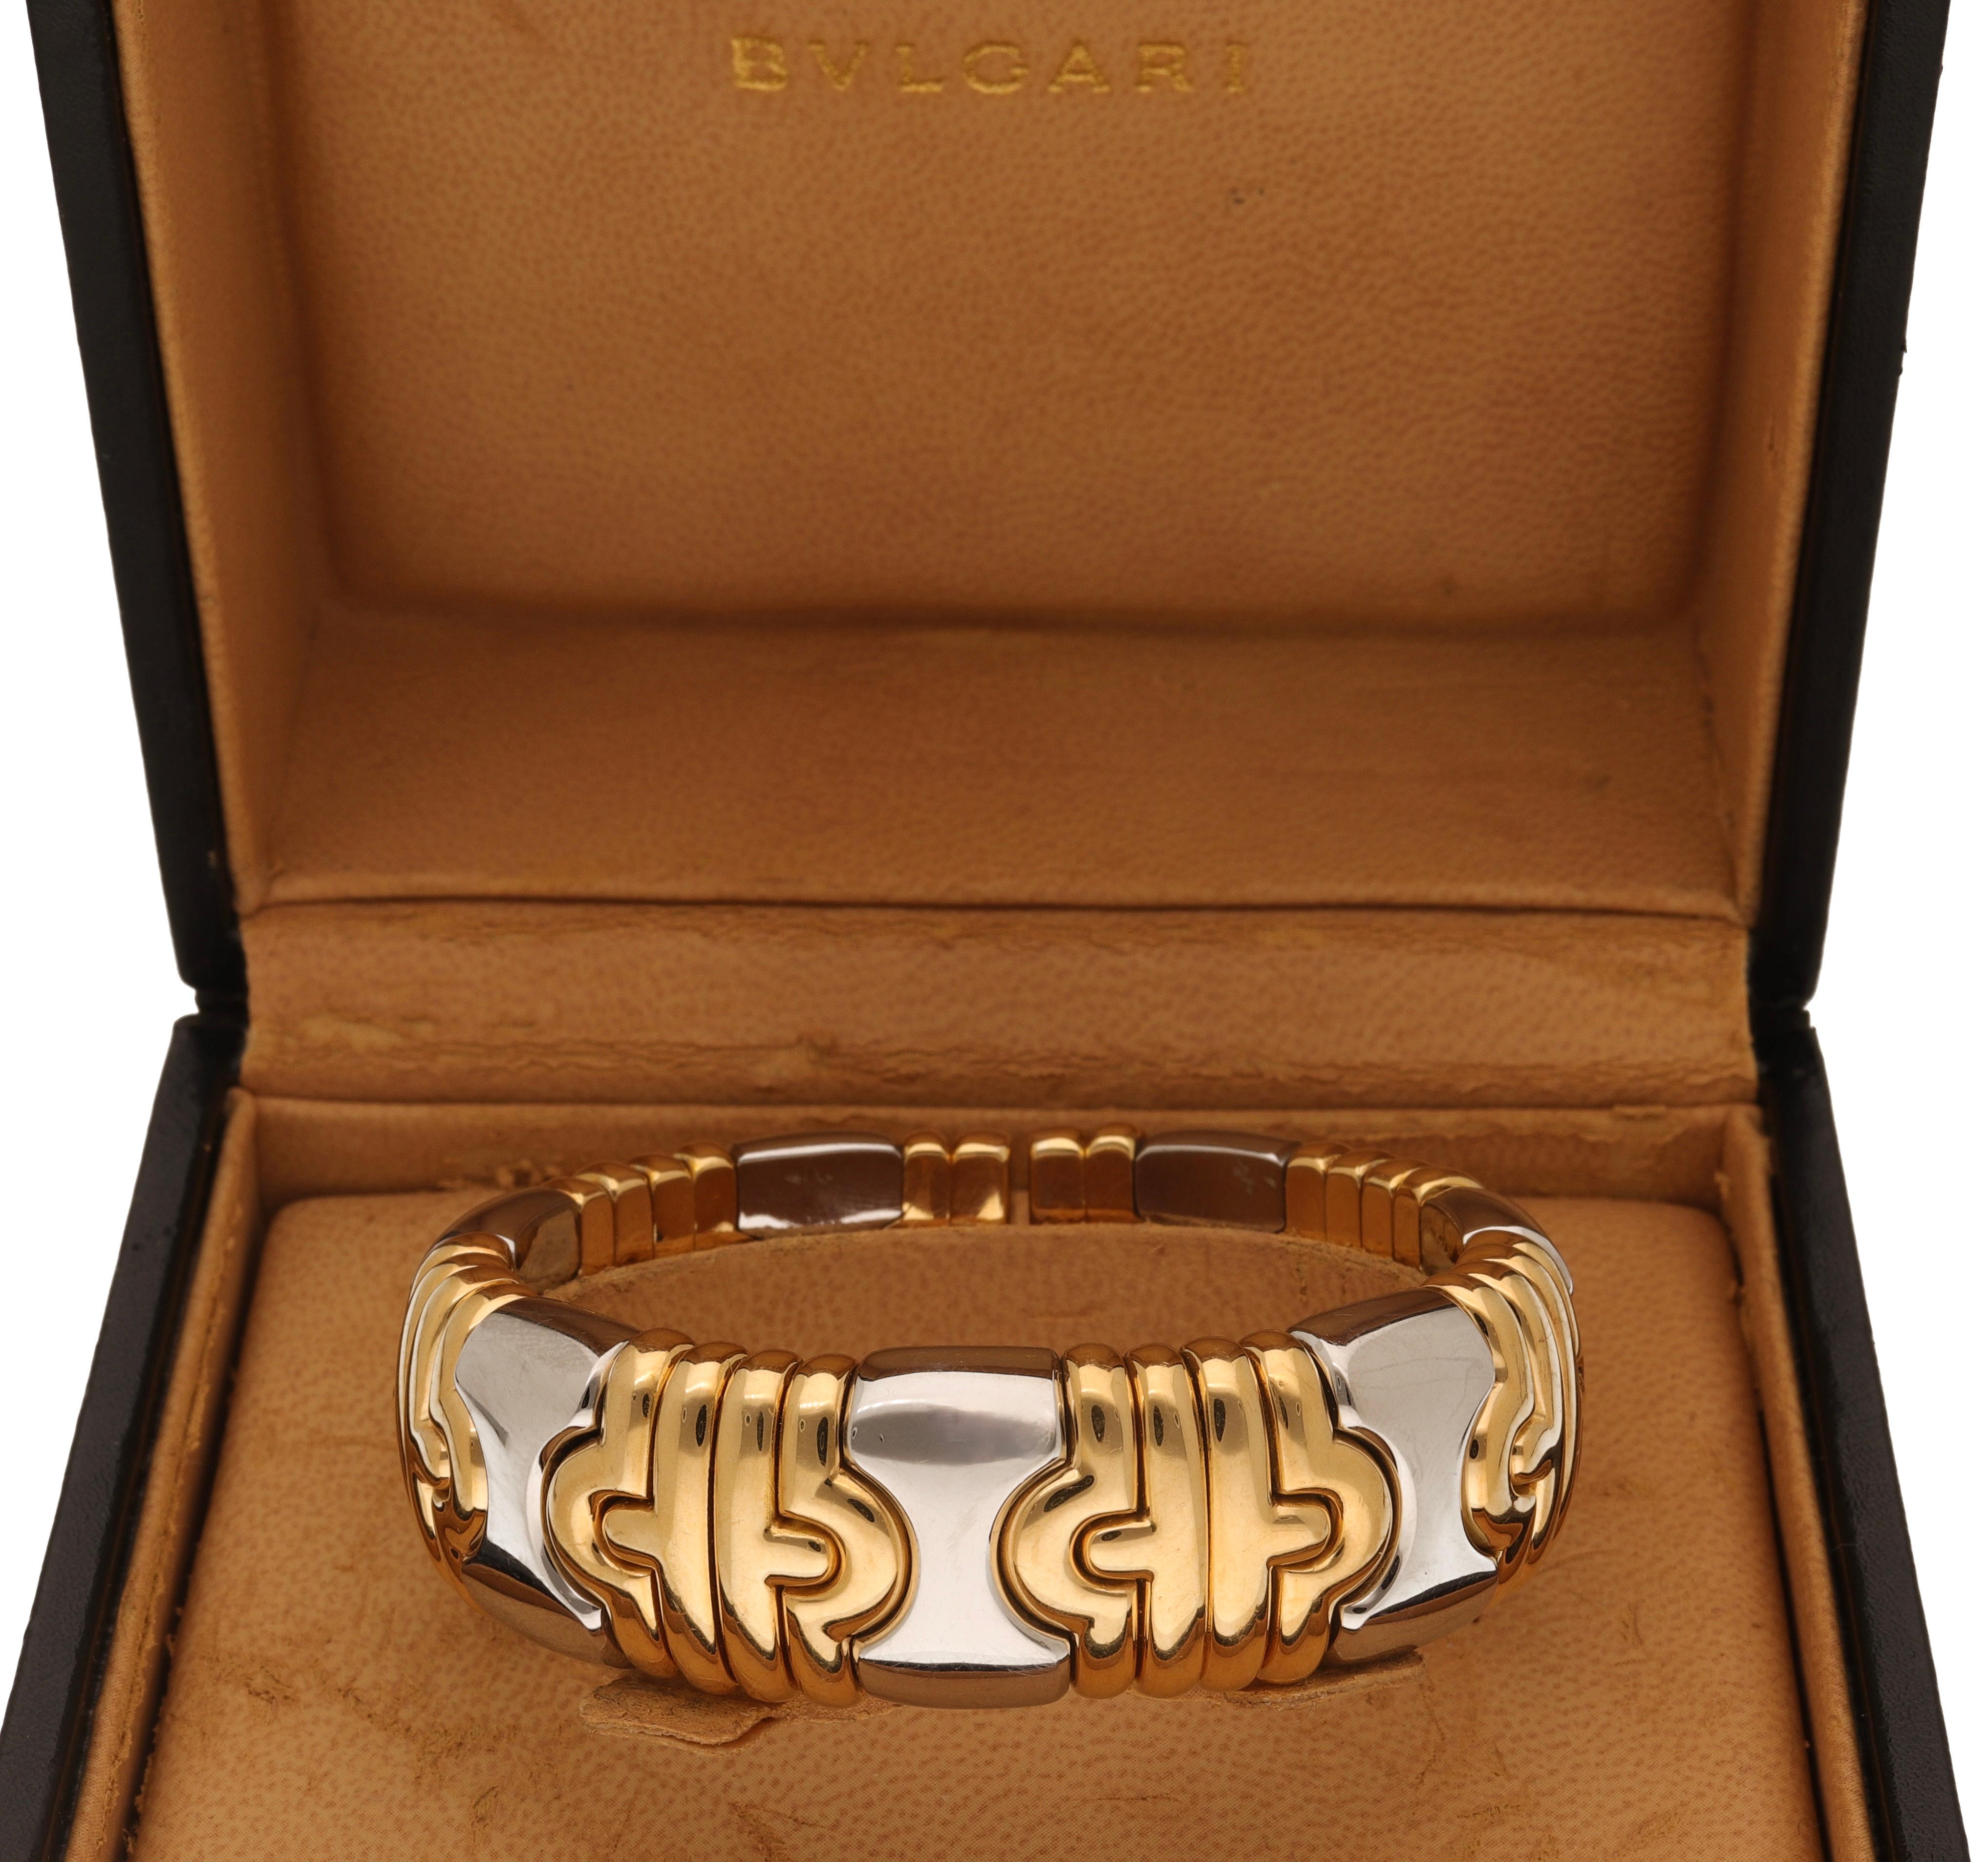 18 kt. yellow gold and steel bangle.
This iconic design signed by Bulgari is perfect to light up your style.
This bangle is open, so it can fit easily different wrist.
Born from the eternity of Rome’s architecture, the design of the Parentesi